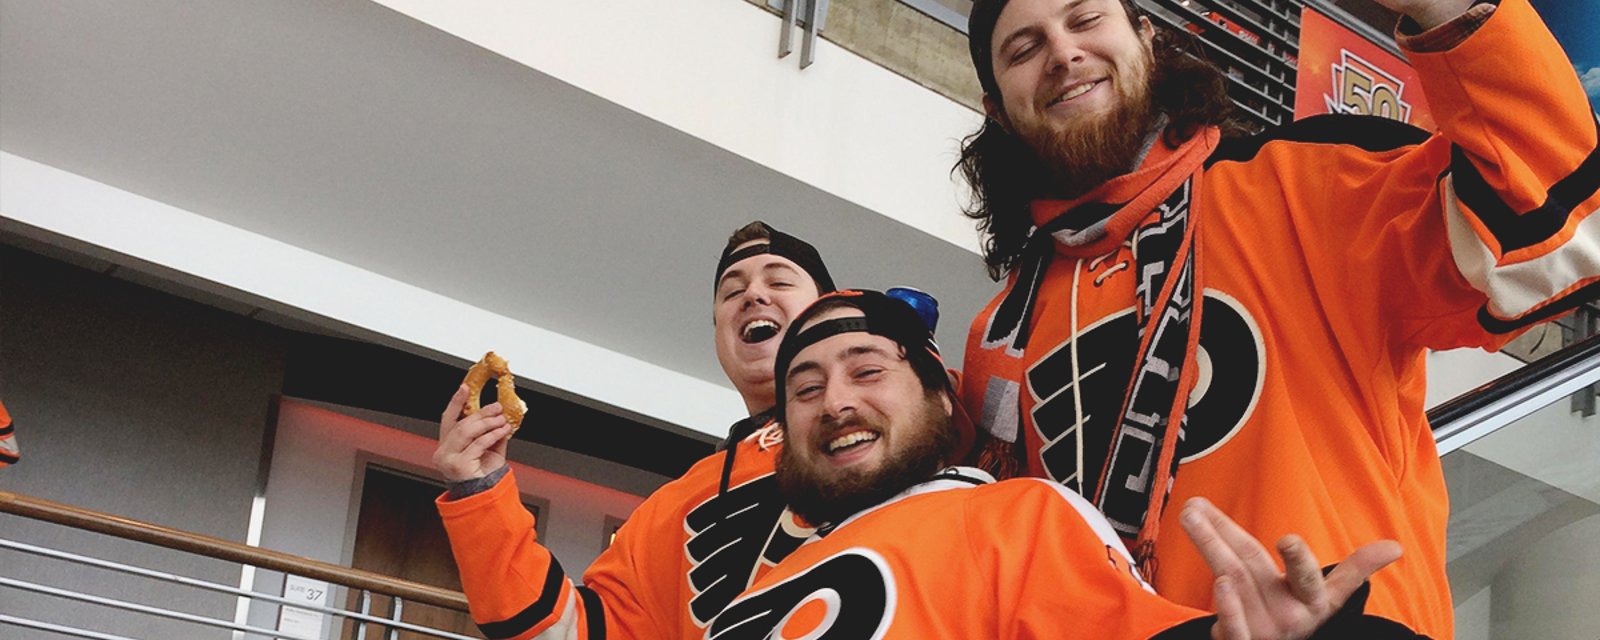 Must Read: Two people reportedly looking to find Flyers fans.